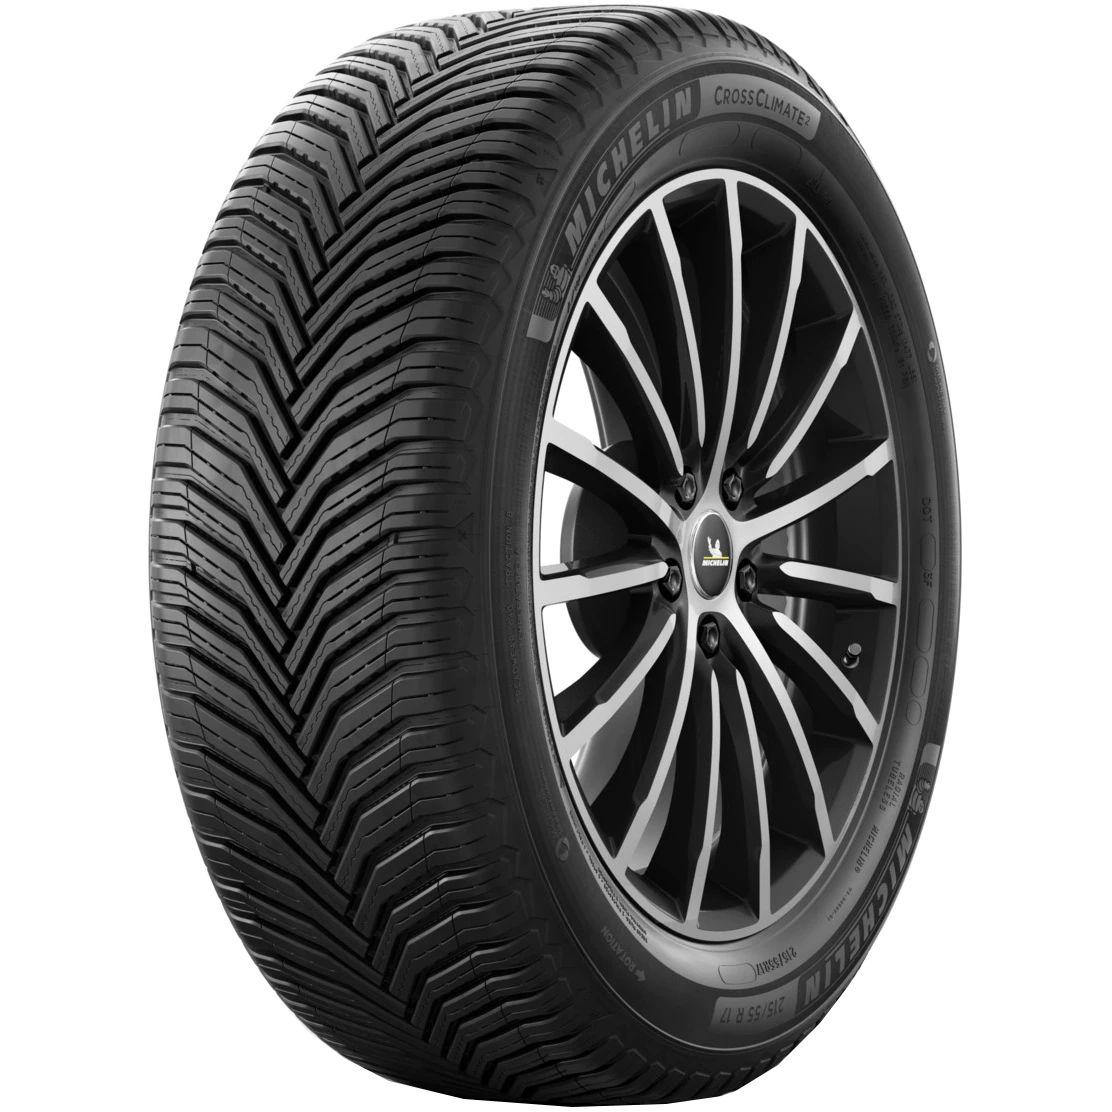 Anvelope all seasons MICHELIN CrossClimate2 M+S 245/40 R18 93Y